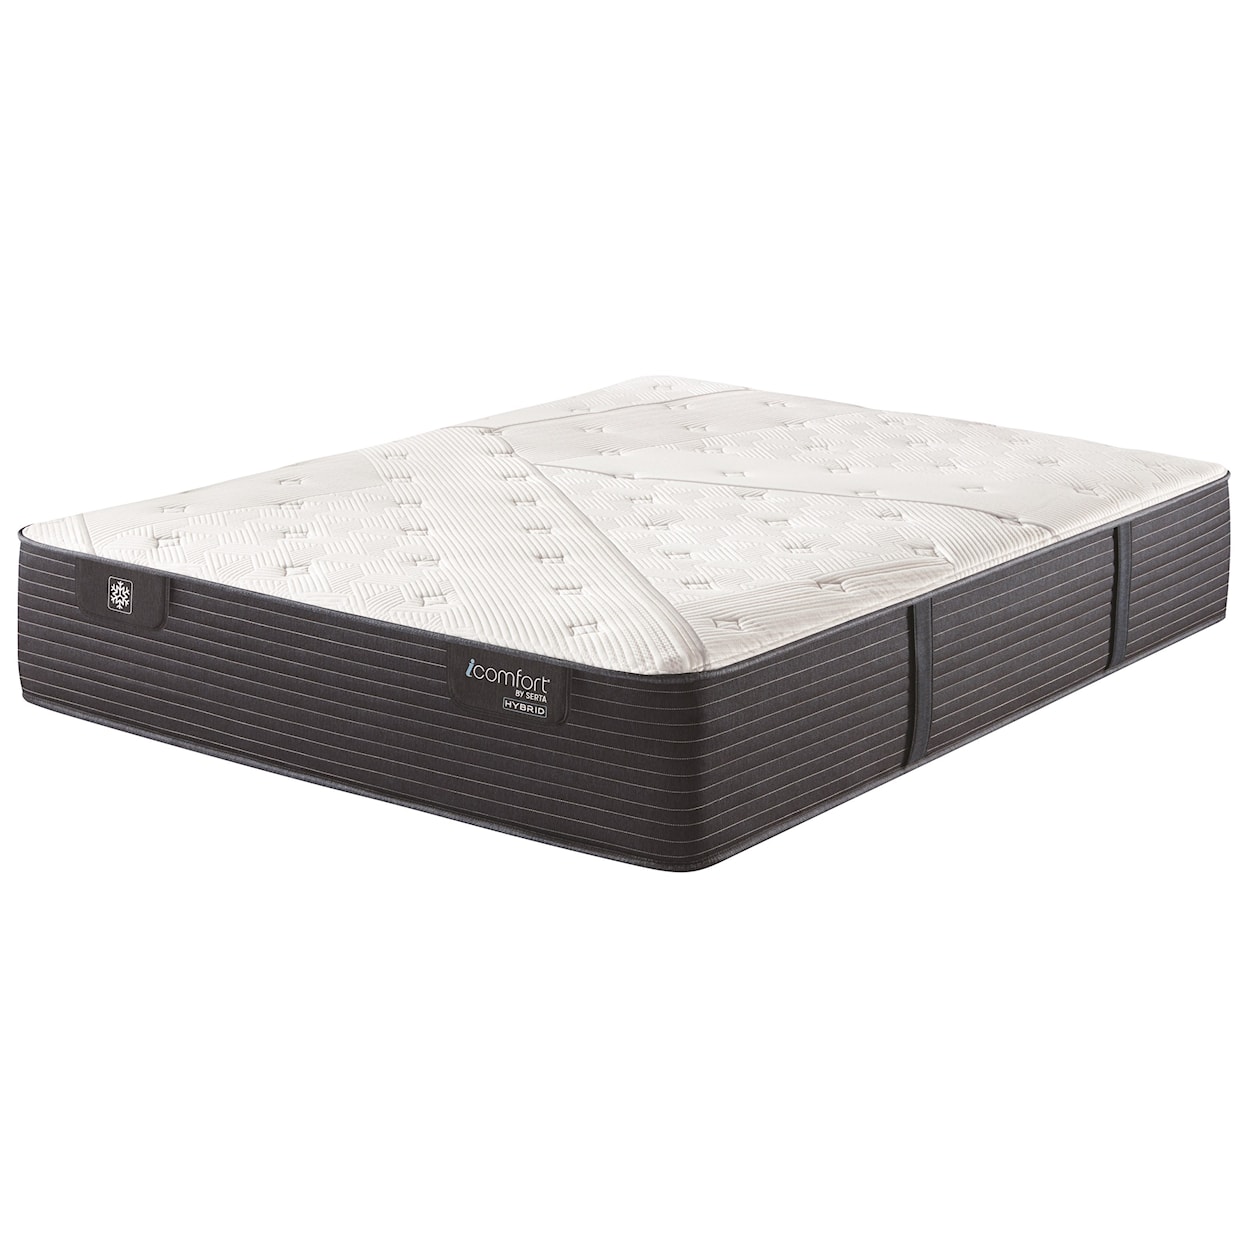 Serta CF1000 Quilted Hybrid II Firm Cal King 13" Firm Quilted Hybrid Mattress